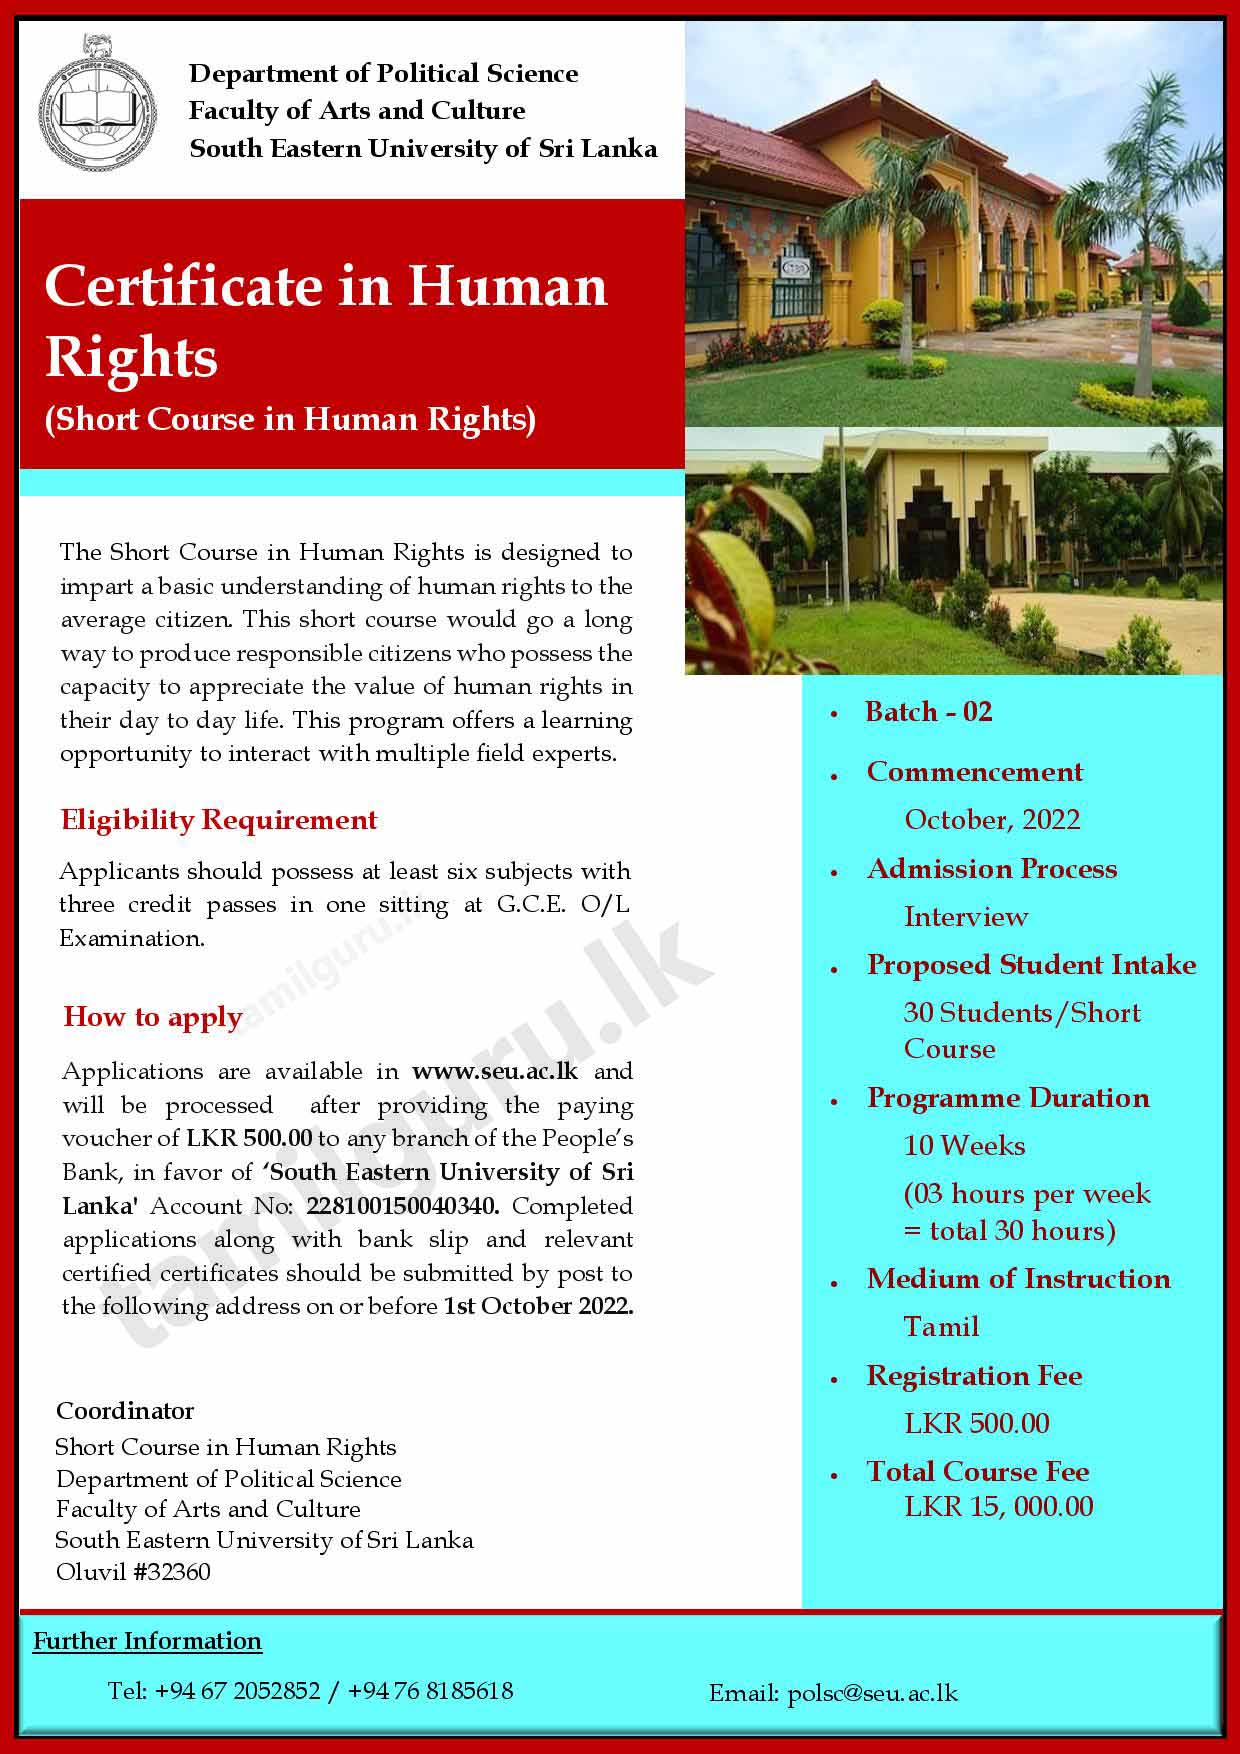 Certificate in Human Rights (Short Course) Application 2022 - South Eastern University of Sri Lanka (SEUSL)